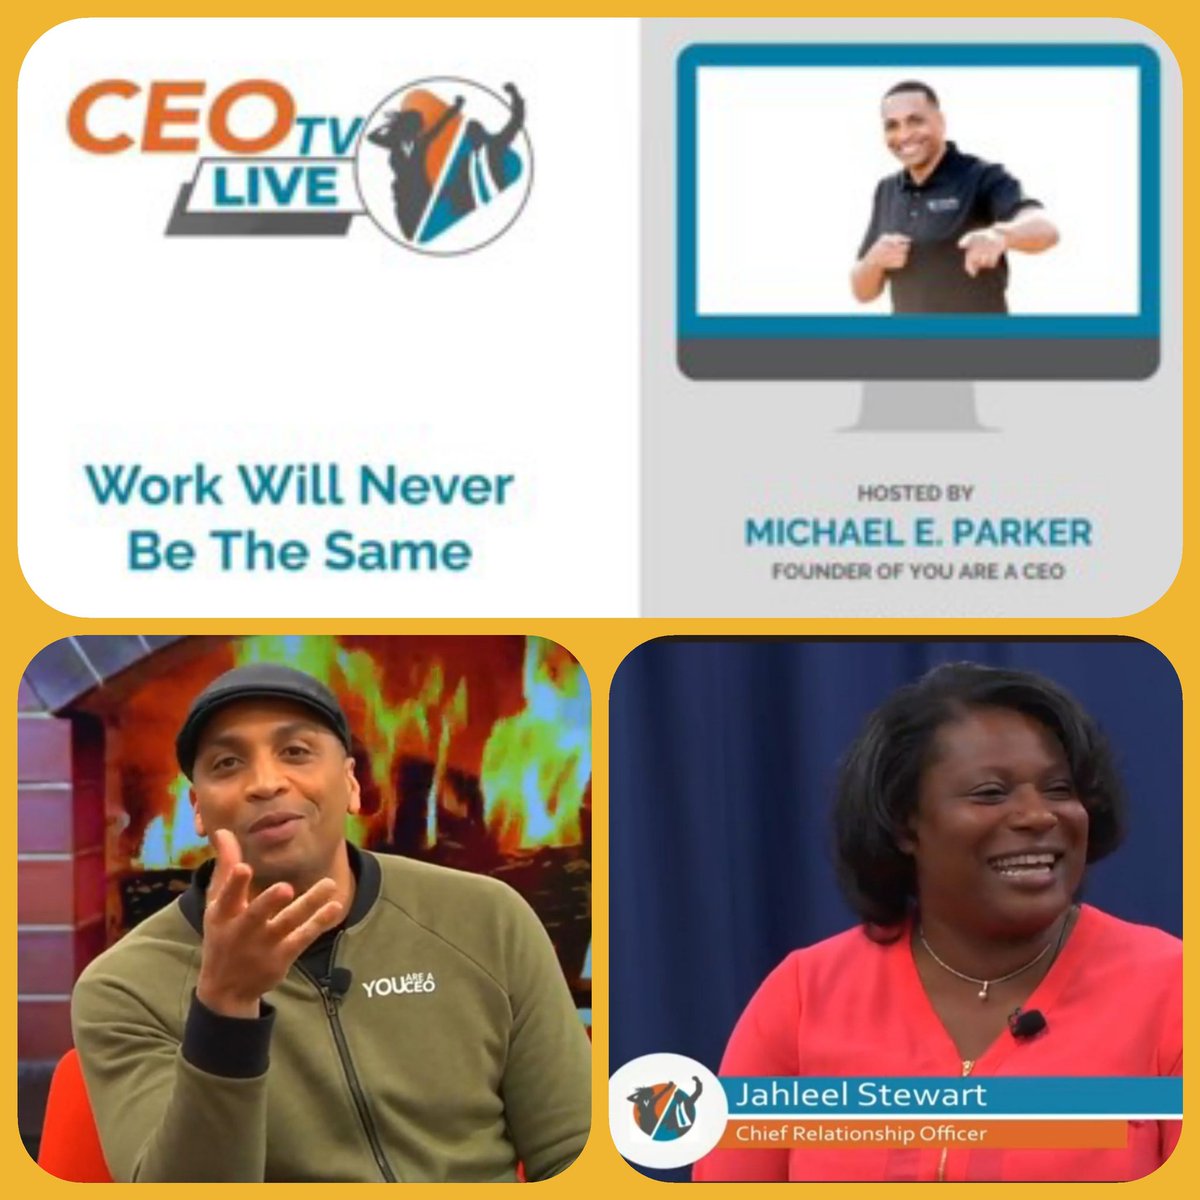 Missed last nights episode of CEO TV?🤔  The conversation between CEO @MichaelEParker and CRO @JahleelStewart delved into the new workplace dynamics due to COVID-19 giving viewers real tips they can immediately use. 
Click to catch up 👉 youtu.be/4KyNnLEOqtQ